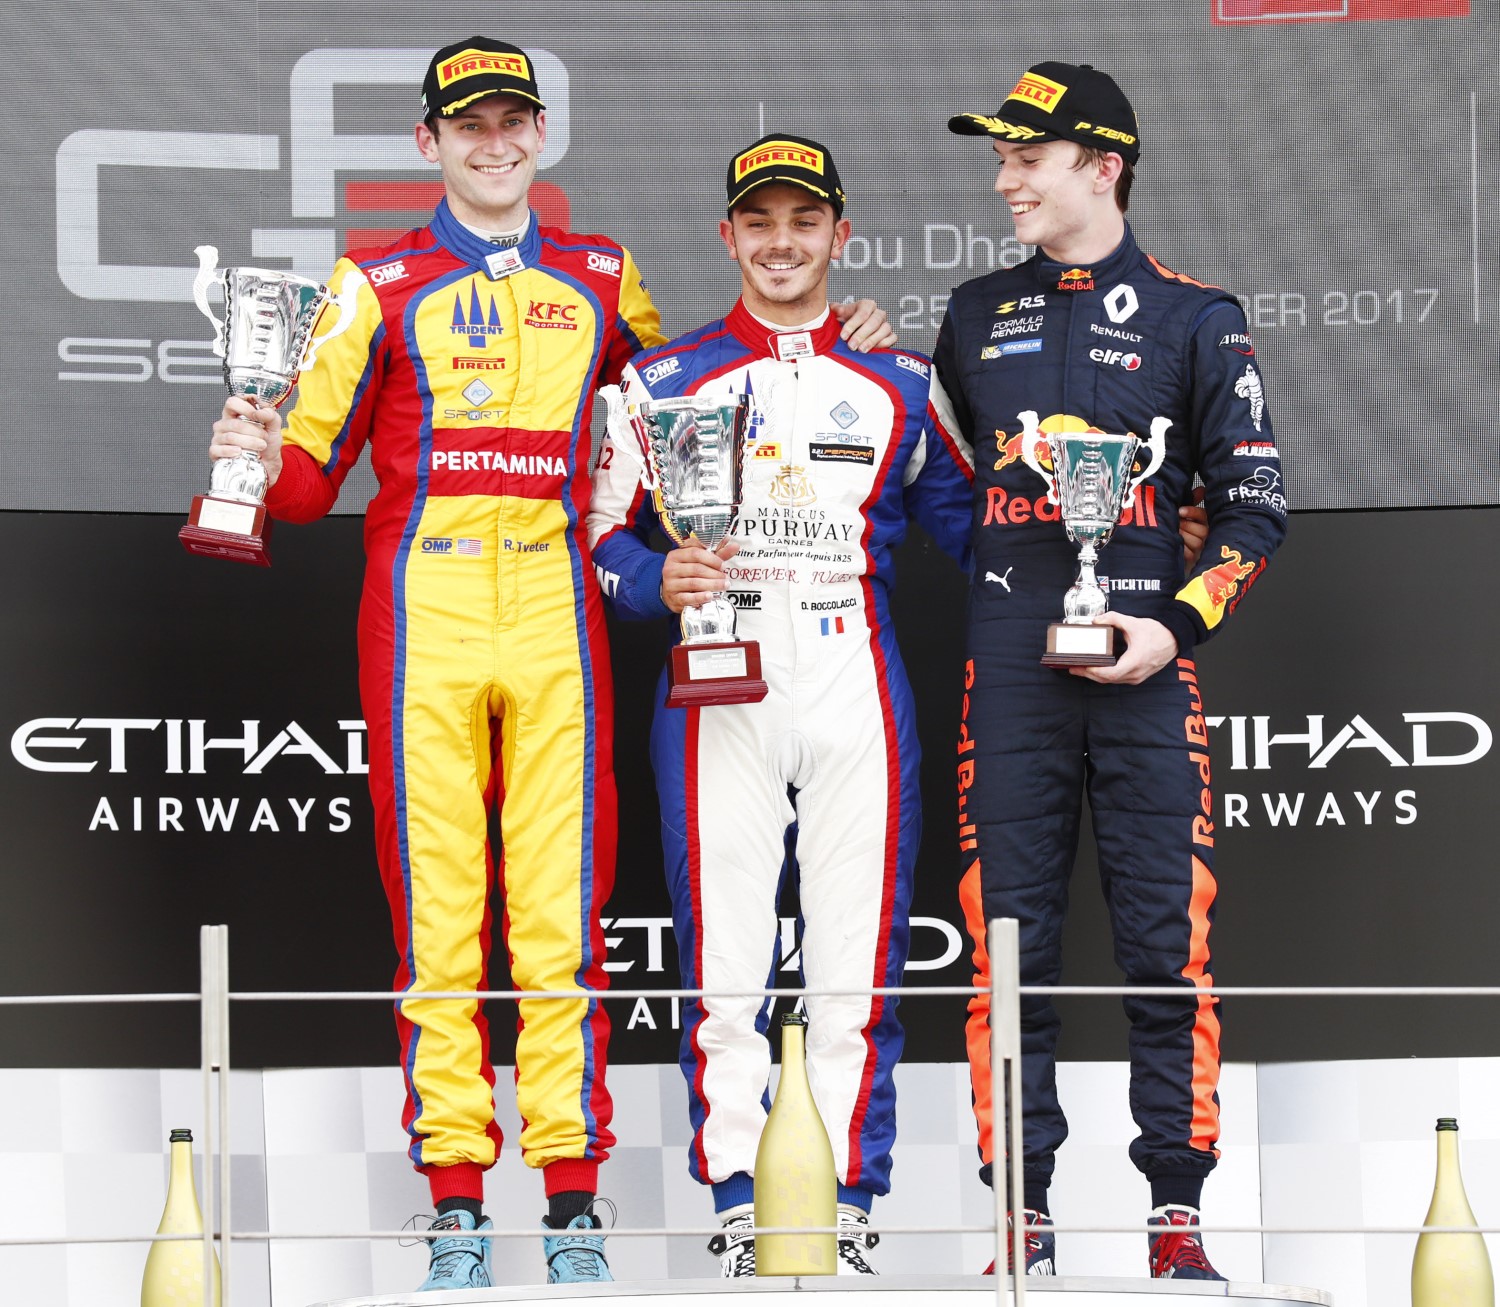 From left, Tveter, Boccolacci and Ticktum